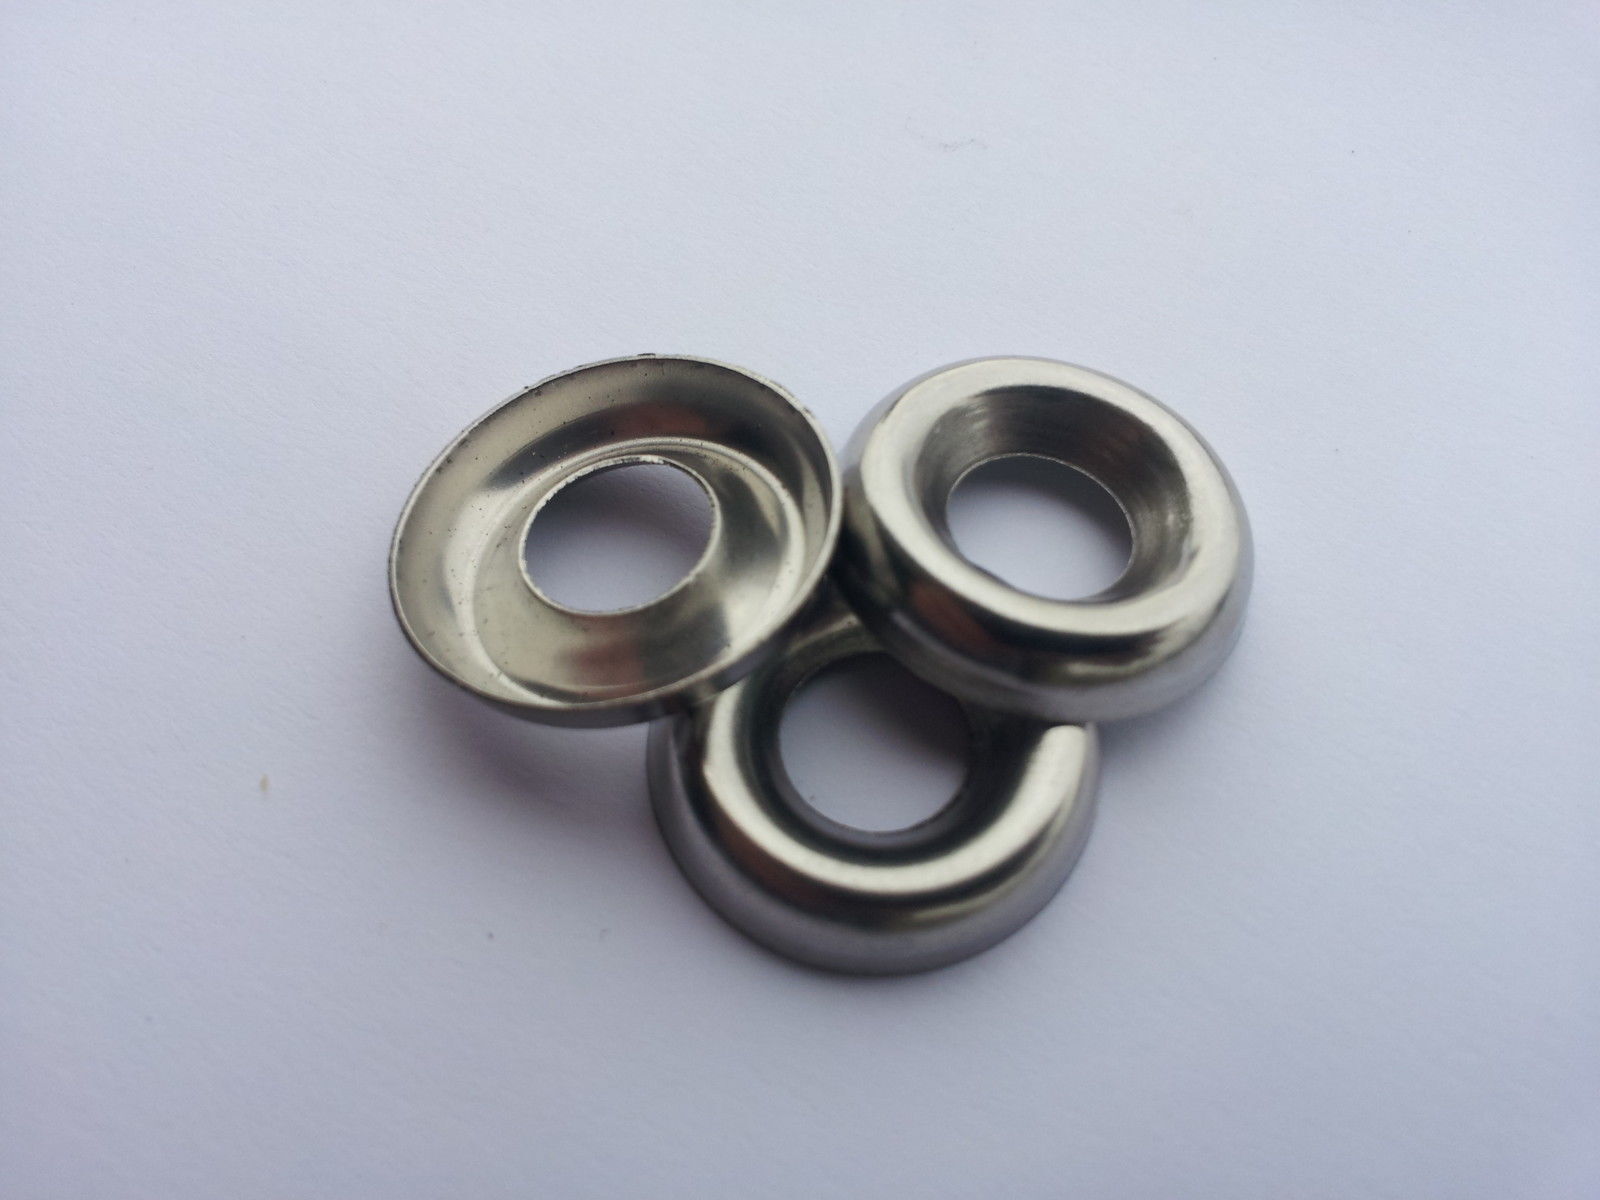 #6 Stainless steel finishing washer 250 QTY